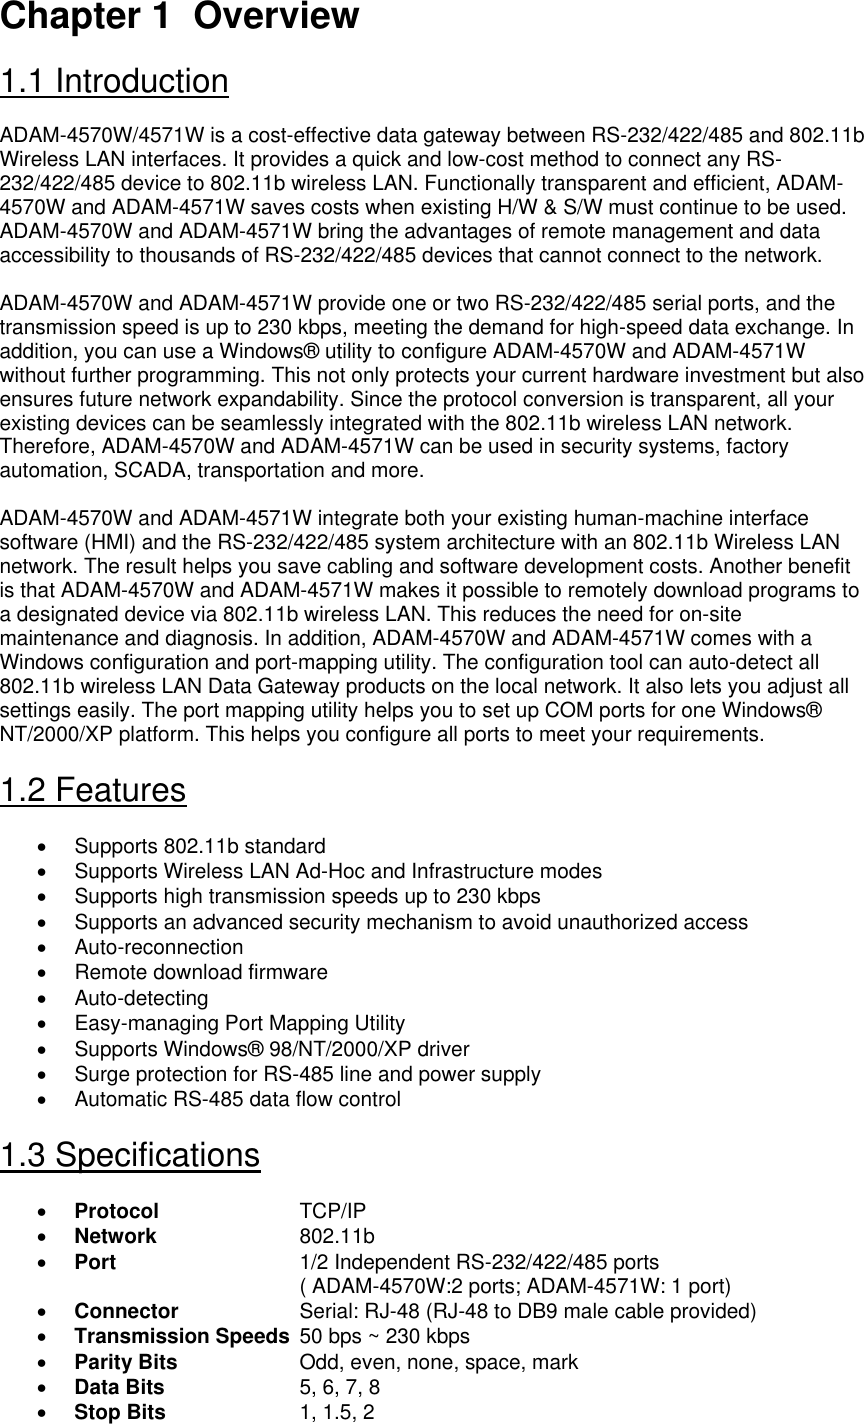 Chapter 1  Overview  1.1 Introduction  ADAM-4570W/4571W is a cost-effective data gateway between RS-232/422/485 and 802.11b Wireless LAN interfaces. It provides a quick and low-cost method to connect any RS-232/422/485 device to 802.11b wireless LAN. Functionally transparent and efficient, ADAM-4570W and ADAM-4571W saves costs when existing H/W &amp; S/W must continue to be used. ADAM-4570W and ADAM-4571W bring the advantages of remote management and data accessibility to thousands of RS-232/422/485 devices that cannot connect to the network.  ADAM-4570W and ADAM-4571W provide one or two RS-232/422/485 serial ports, and the transmission speed is up to 230 kbps, meeting the demand for high-speed data exchange. In addition, you can use a Windows® utility to configure ADAM-4570W and ADAM-4571W without further programming. This not only protects your current hardware investment but also ensures future network expandability. Since the protocol conversion is transparent, all your existing devices can be seamlessly integrated with the 802.11b wireless LAN network. Therefore, ADAM-4570W and ADAM-4571W can be used in security systems, factory automation, SCADA, transportation and more.  ADAM-4570W and ADAM-4571W integrate both your existing human-machine interface software (HMI) and the RS-232/422/485 system architecture with an 802.11b Wireless LAN network. The result helps you save cabling and software development costs. Another benefit is that ADAM-4570W and ADAM-4571W makes it possible to remotely download programs to a designated device via 802.11b wireless LAN. This reduces the need for on-site maintenance and diagnosis. In addition, ADAM-4570W and ADAM-4571W comes with a Windows configuration and port-mapping utility. The configuration tool can auto-detect all 802.11b wireless LAN Data Gateway products on the local network. It also lets you adjust all settings easily. The port mapping utility helps you to set up COM ports for one Windows® NT/2000/XP platform. This helps you configure all ports to meet your requirements.  1.2 Features  •  Supports 802.11b standard •  Supports Wireless LAN Ad-Hoc and Infrastructure modes •  Supports high transmission speeds up to 230 kbps •  Supports an advanced security mechanism to avoid unauthorized access • Auto-reconnection •  Remote download firmware • Auto-detecting •  Easy-managing Port Mapping Utility •  Supports Windows® 98/NT/2000/XP driver •  Surge protection for RS-485 line and power supply •  Automatic RS-485 data flow control   1.3 Specifications  • Protocol     TCP/IP • Network     802.11b • Port       1/2 Independent RS-232/422/485 ports                                          ( ADAM-4570W:2 ports; ADAM-4571W: 1 port) • Connector     Serial: RJ-48 (RJ-48 to DB9 male cable provided) • Transmission Speeds  50 bps ~ 230 kbps • Parity Bits     Odd, even, none, space, mark • Data Bits     5, 6, 7, 8 • Stop Bits     1, 1.5, 2 